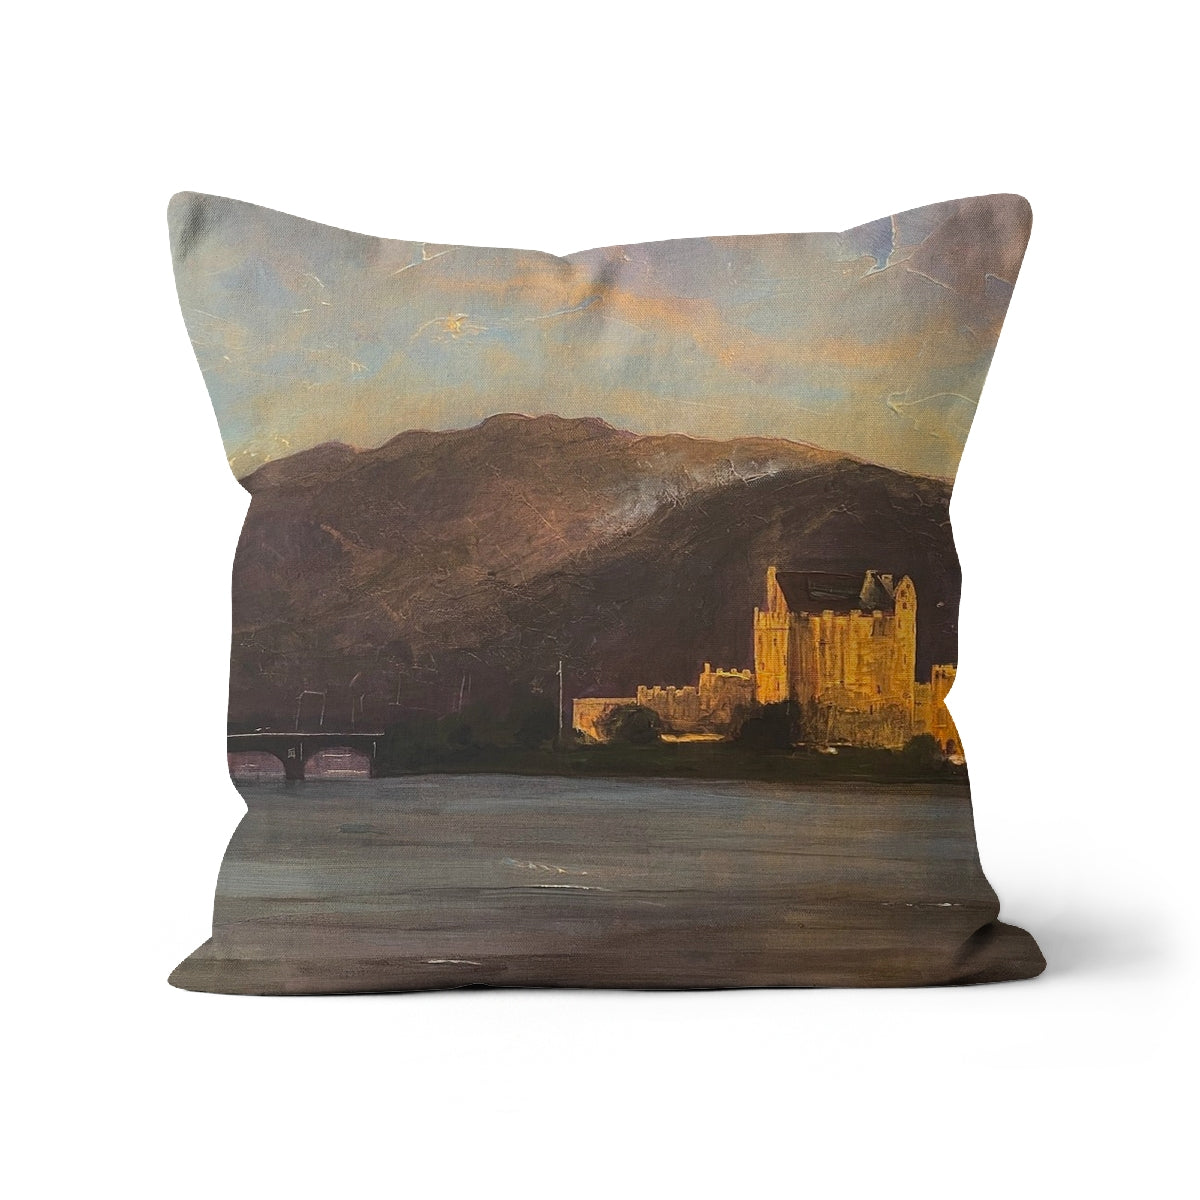 Eilean Donan Castle Art Gifts Cushion-Cushions-Historic & Iconic Scotland Art Gallery-Faux Suede-22"x22"-Paintings, Prints, Homeware, Art Gifts From Scotland By Scottish Artist Kevin Hunter